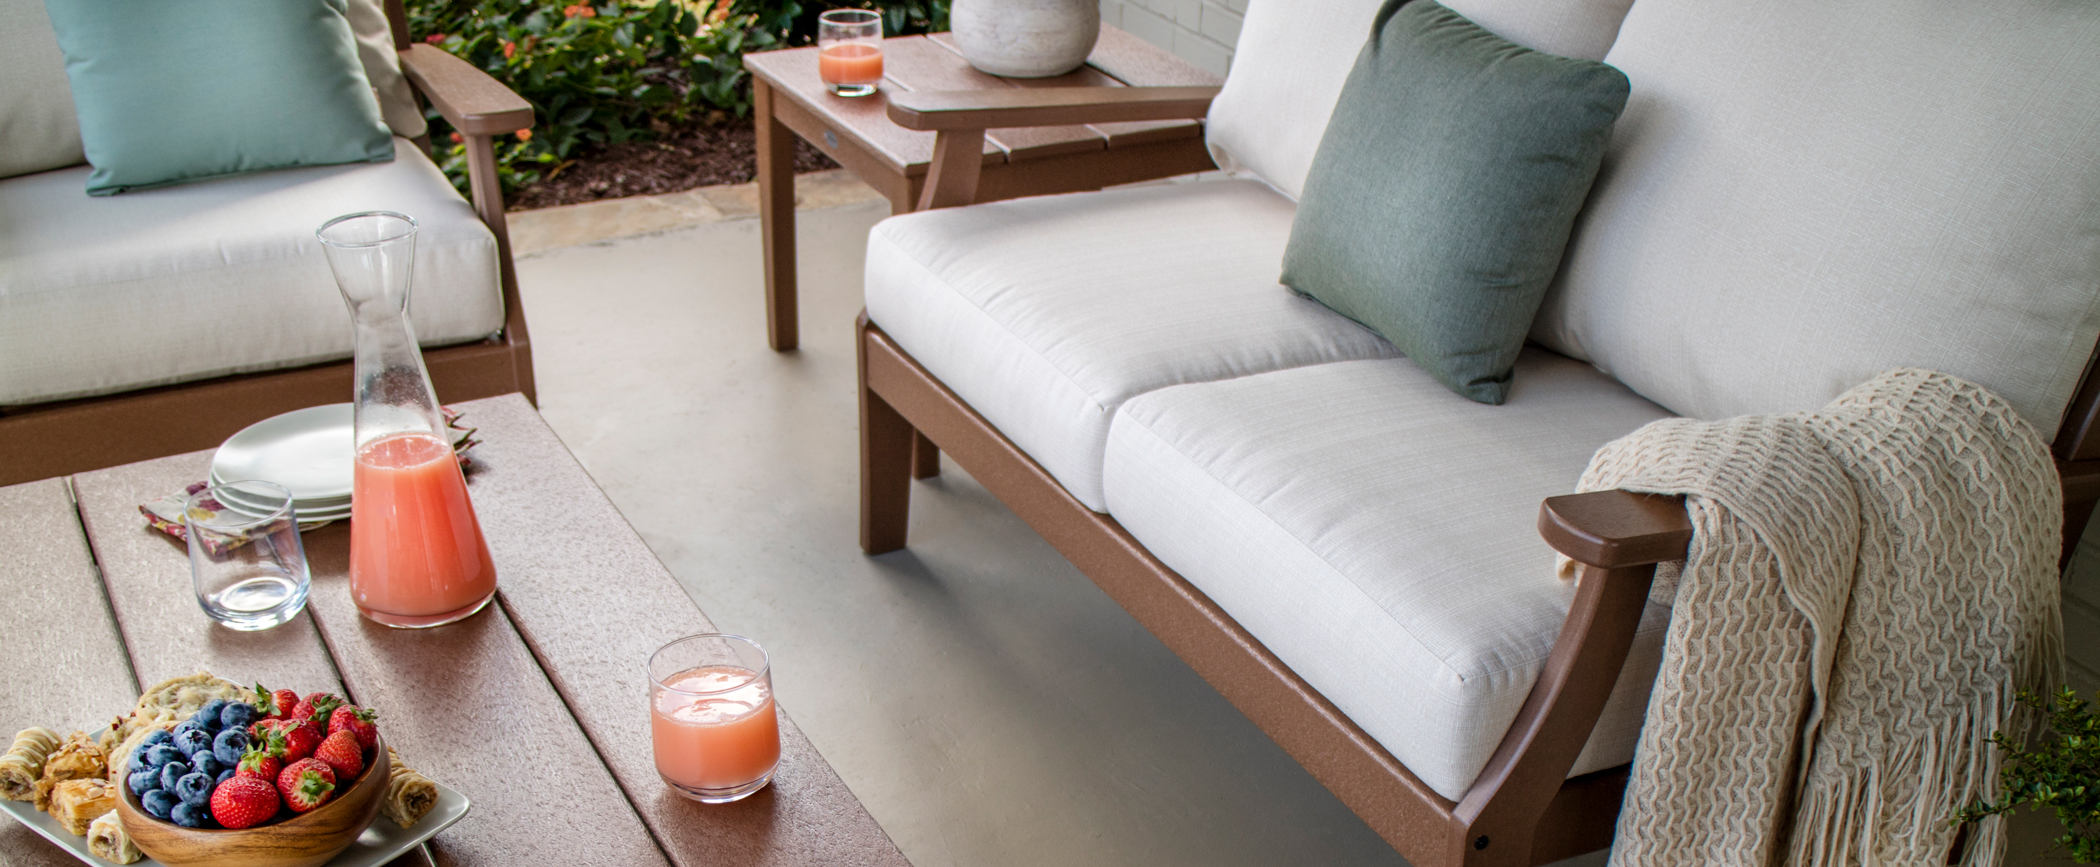 How To Clean Outdoor Cushions, How To Get Mold Out Of Upholstered Furniture